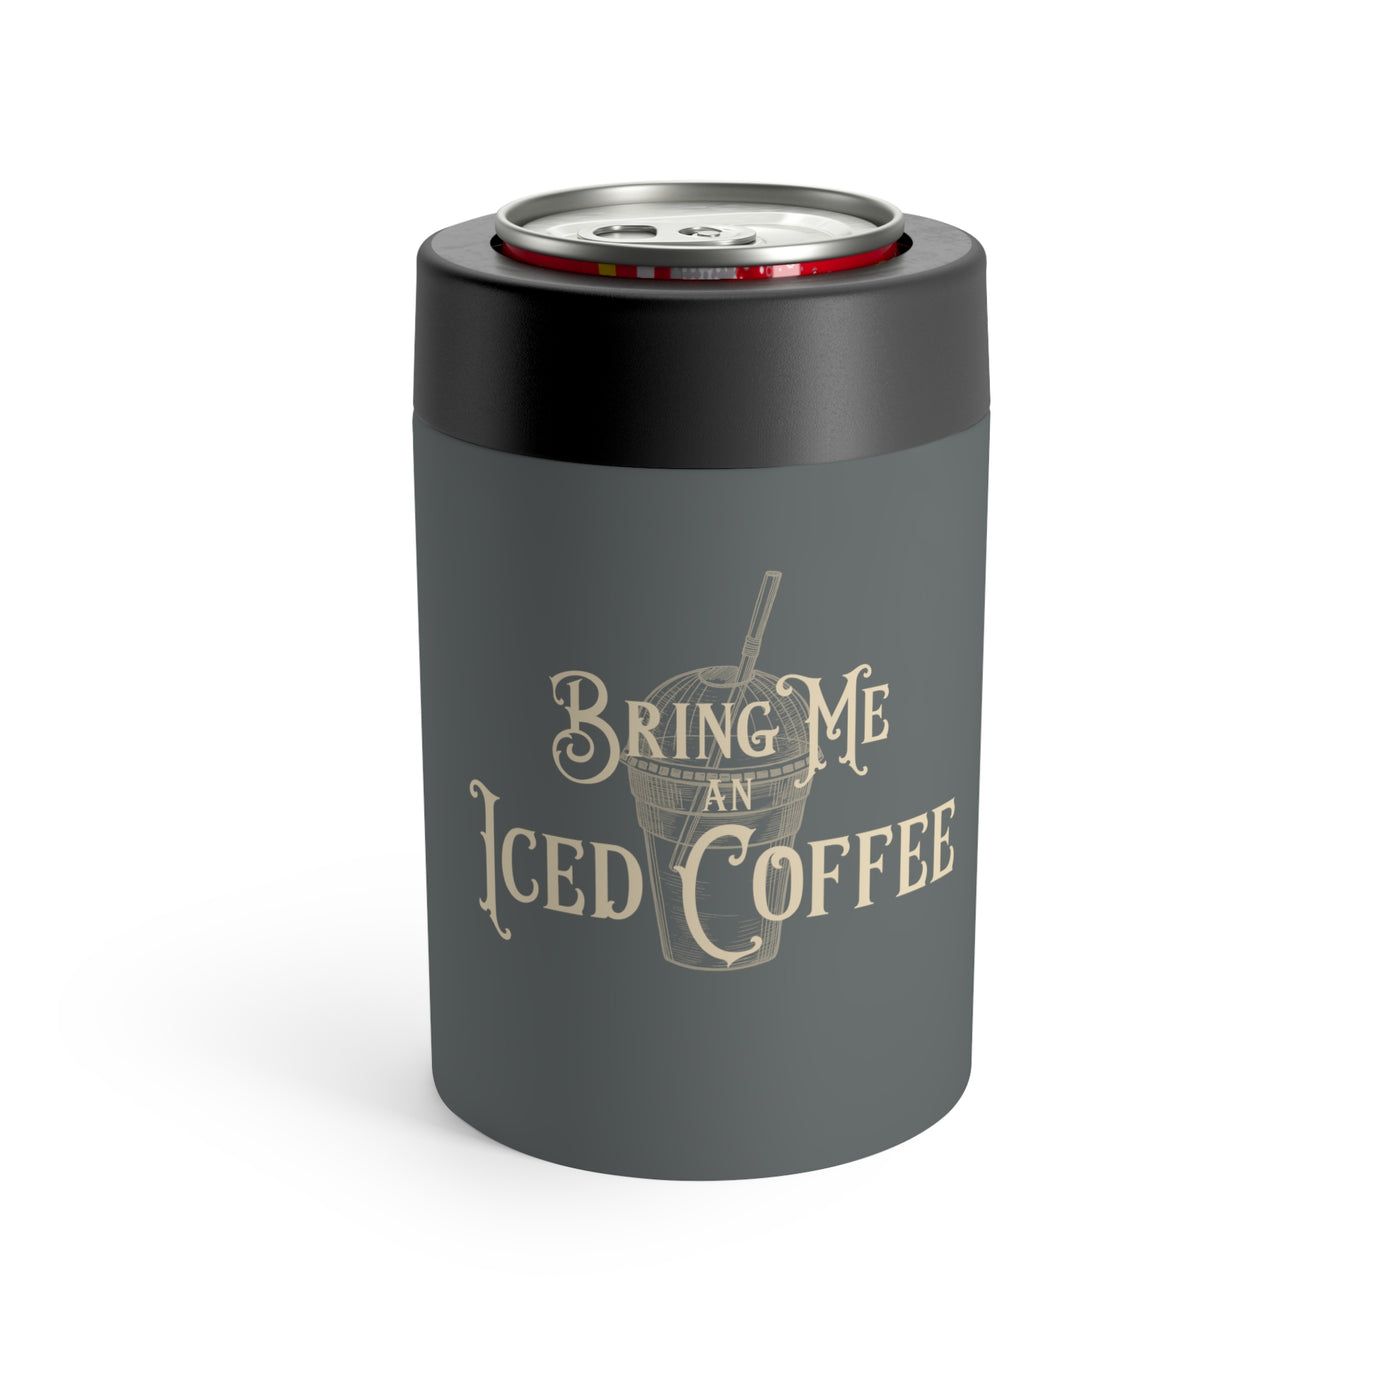 Bring Me An Iced Coffee Stainless Steel Can Holder